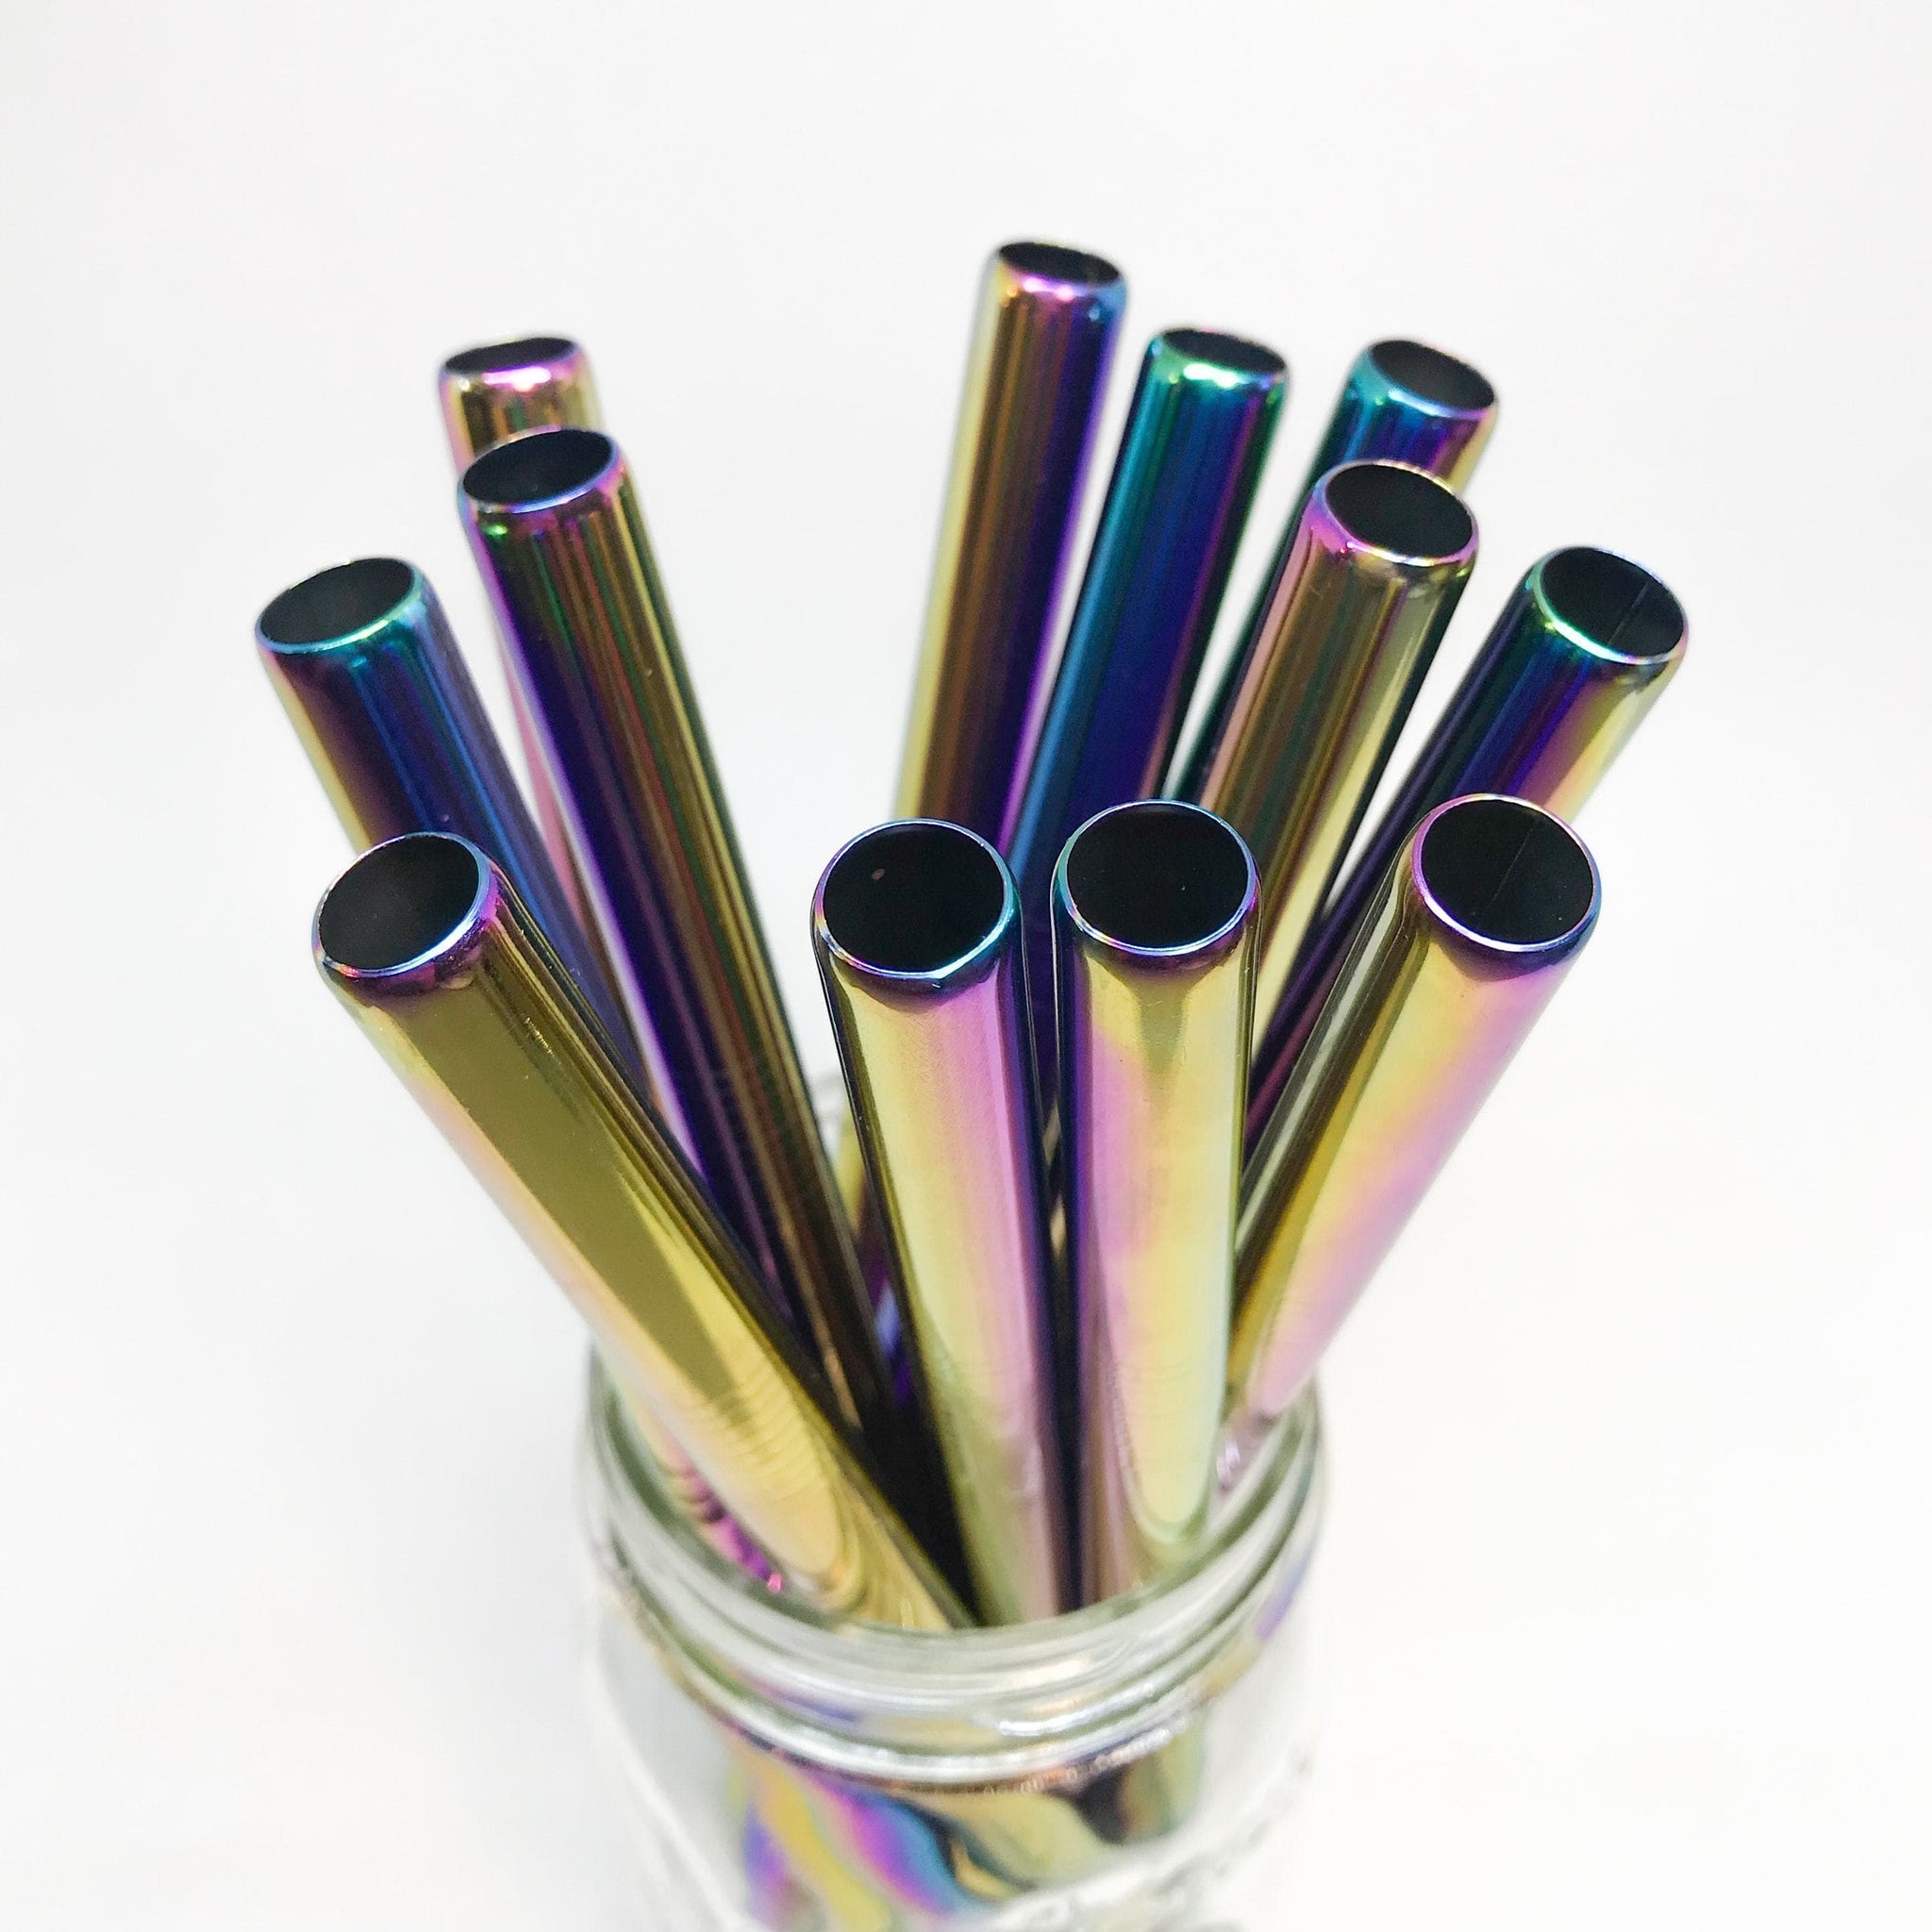 Reusable Rainbow Stainless Steel Straw, Reusable Straw, Tumbler Straws,  Rainbow Straw, Metal Straw, Mermaid Straw, Reuse Straw 